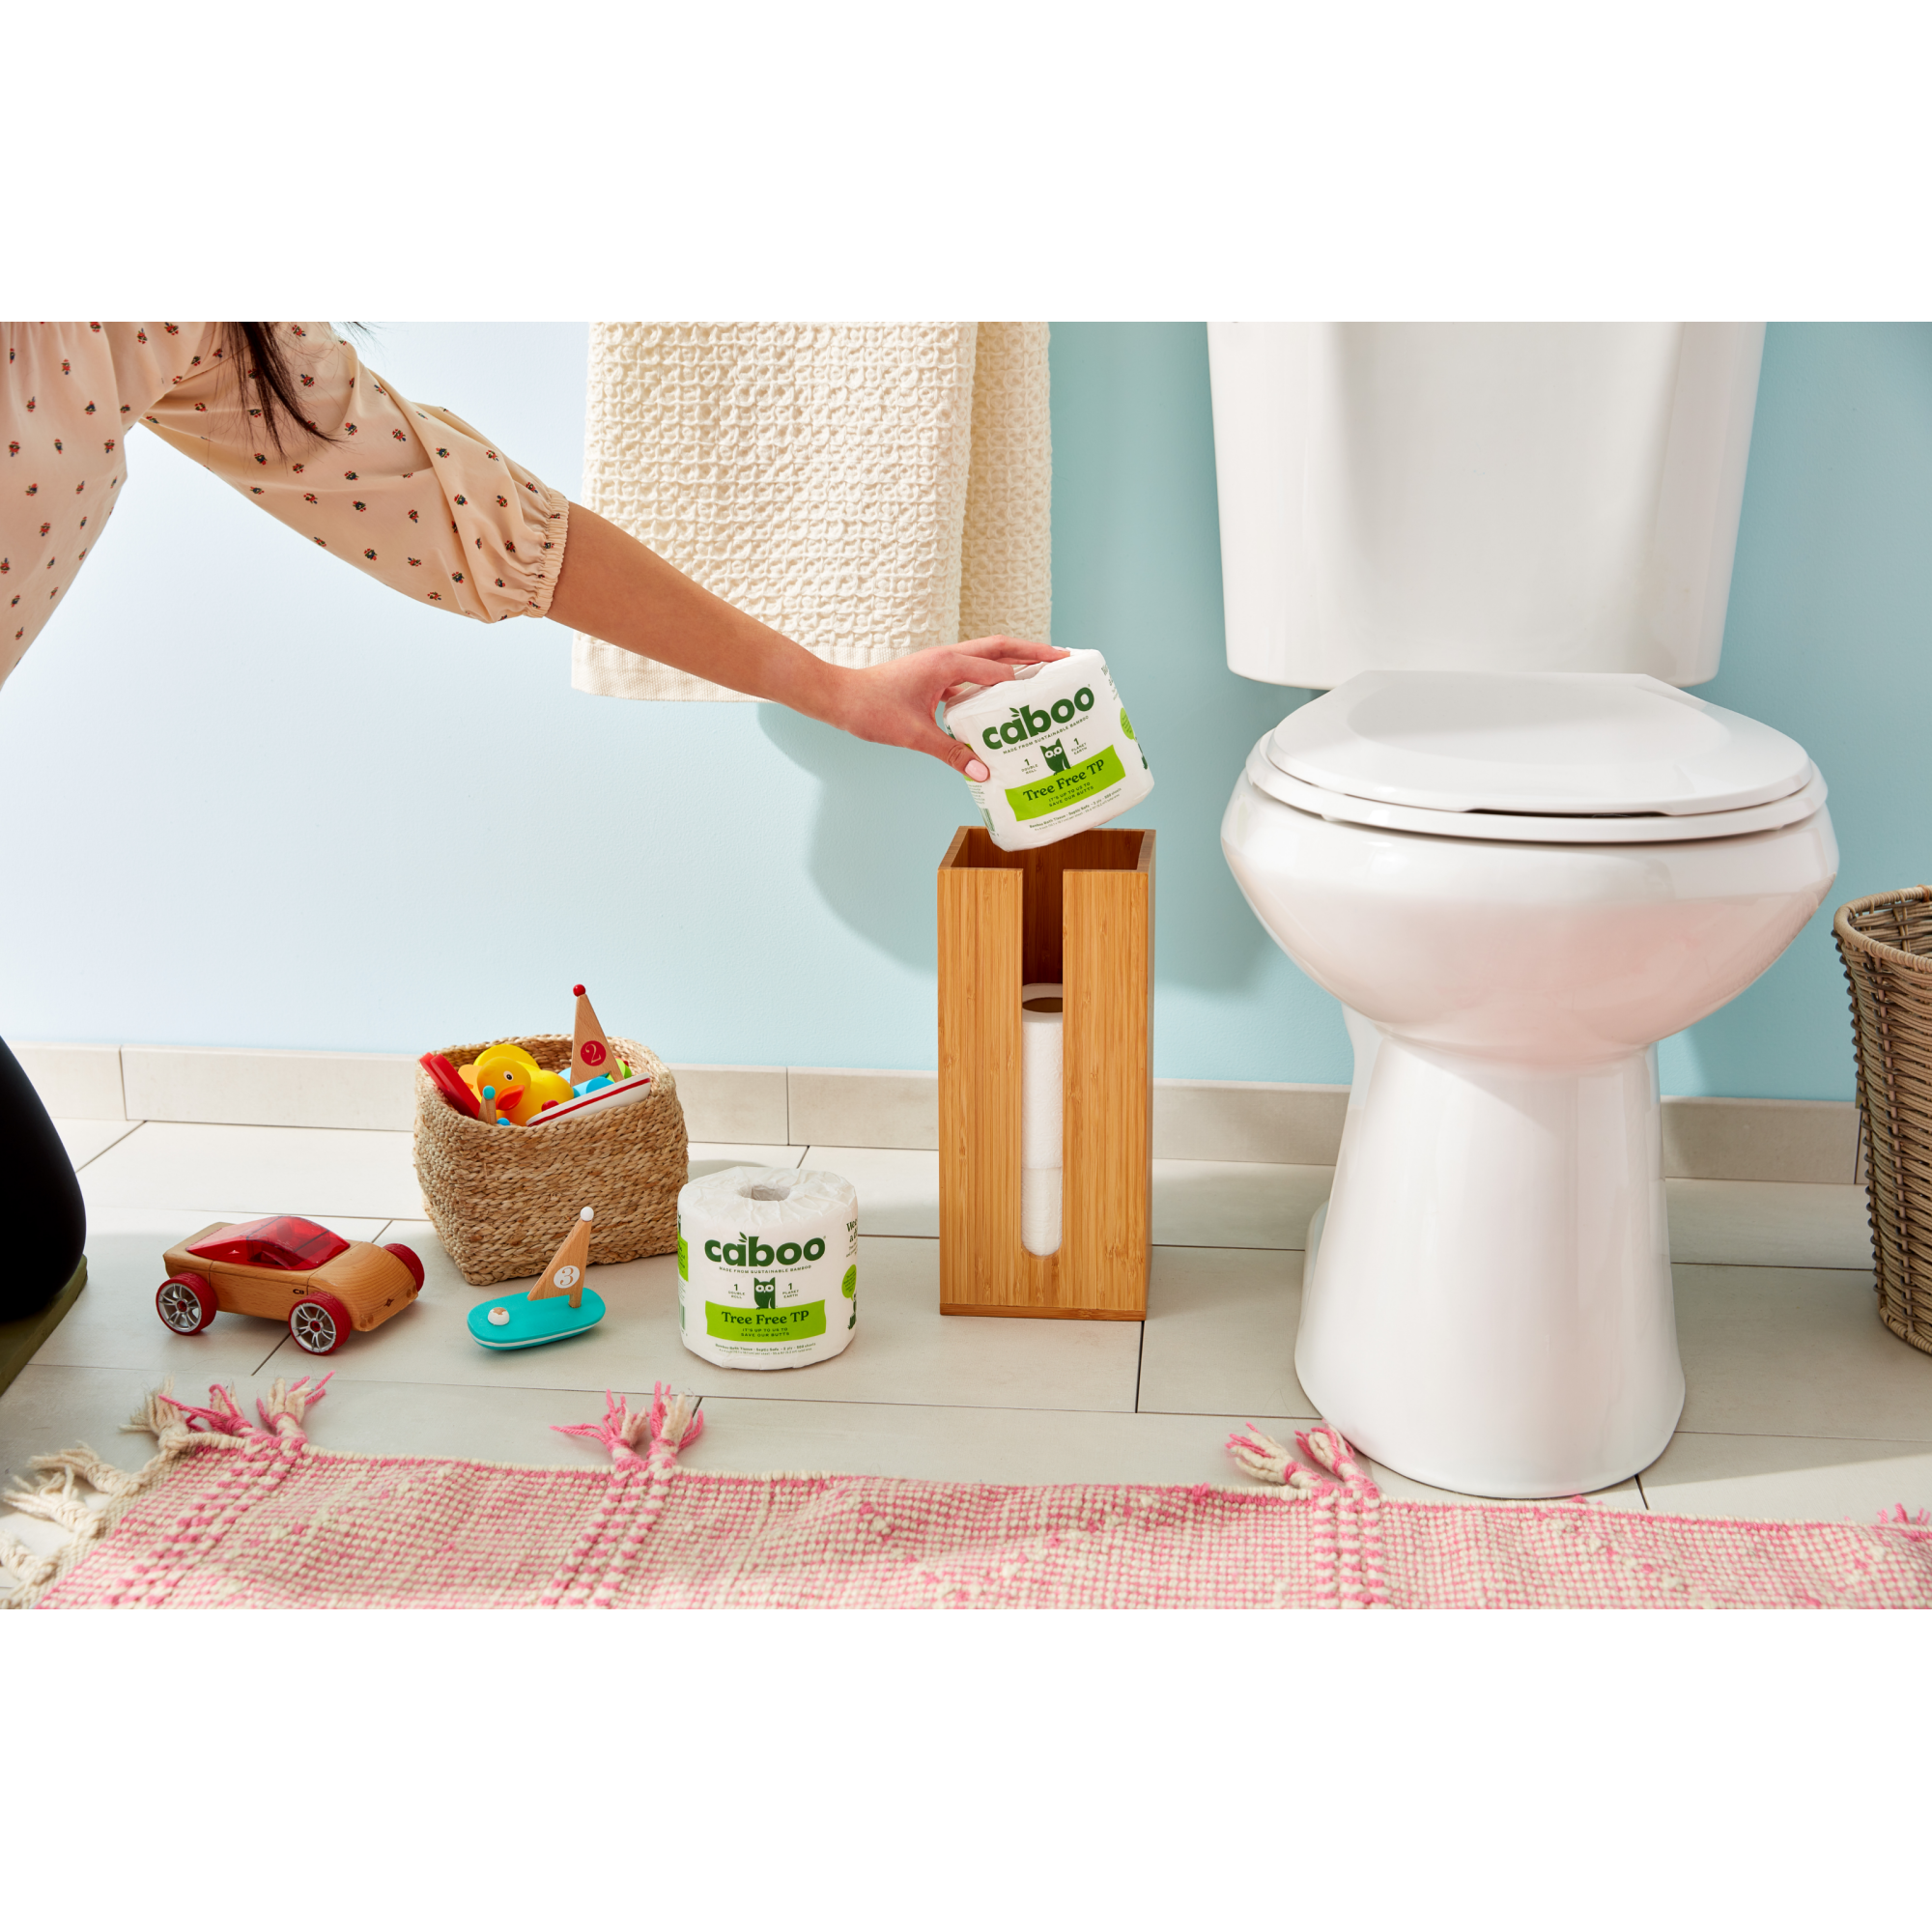 Bamboo Double Toilet Paper Roll Holder - Eco-Friendly and